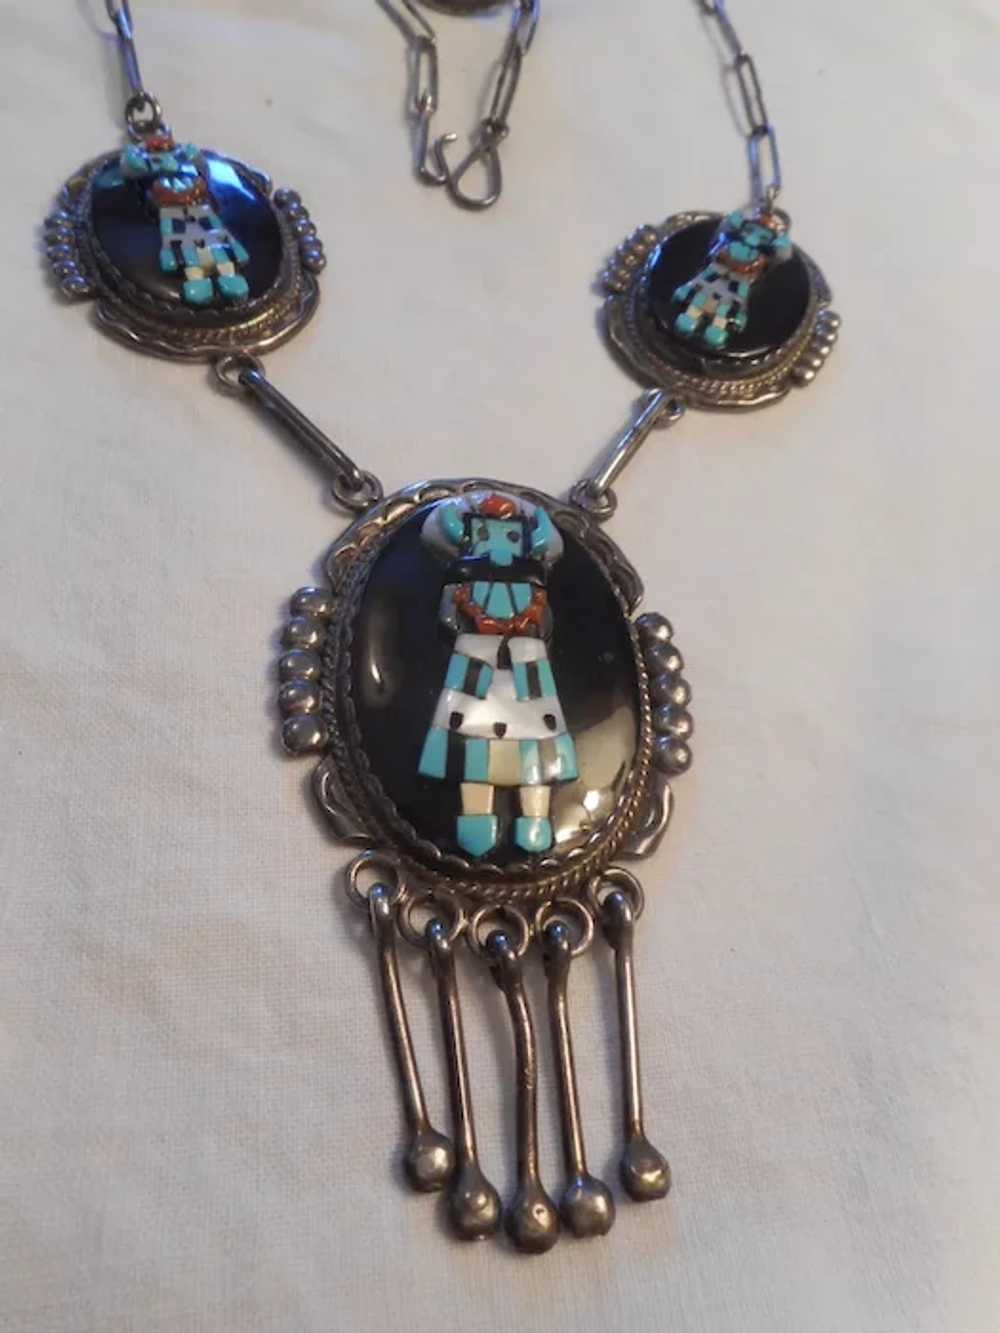 Zuni Mosaic Inlay Vintage Necklace and Ring - image 2